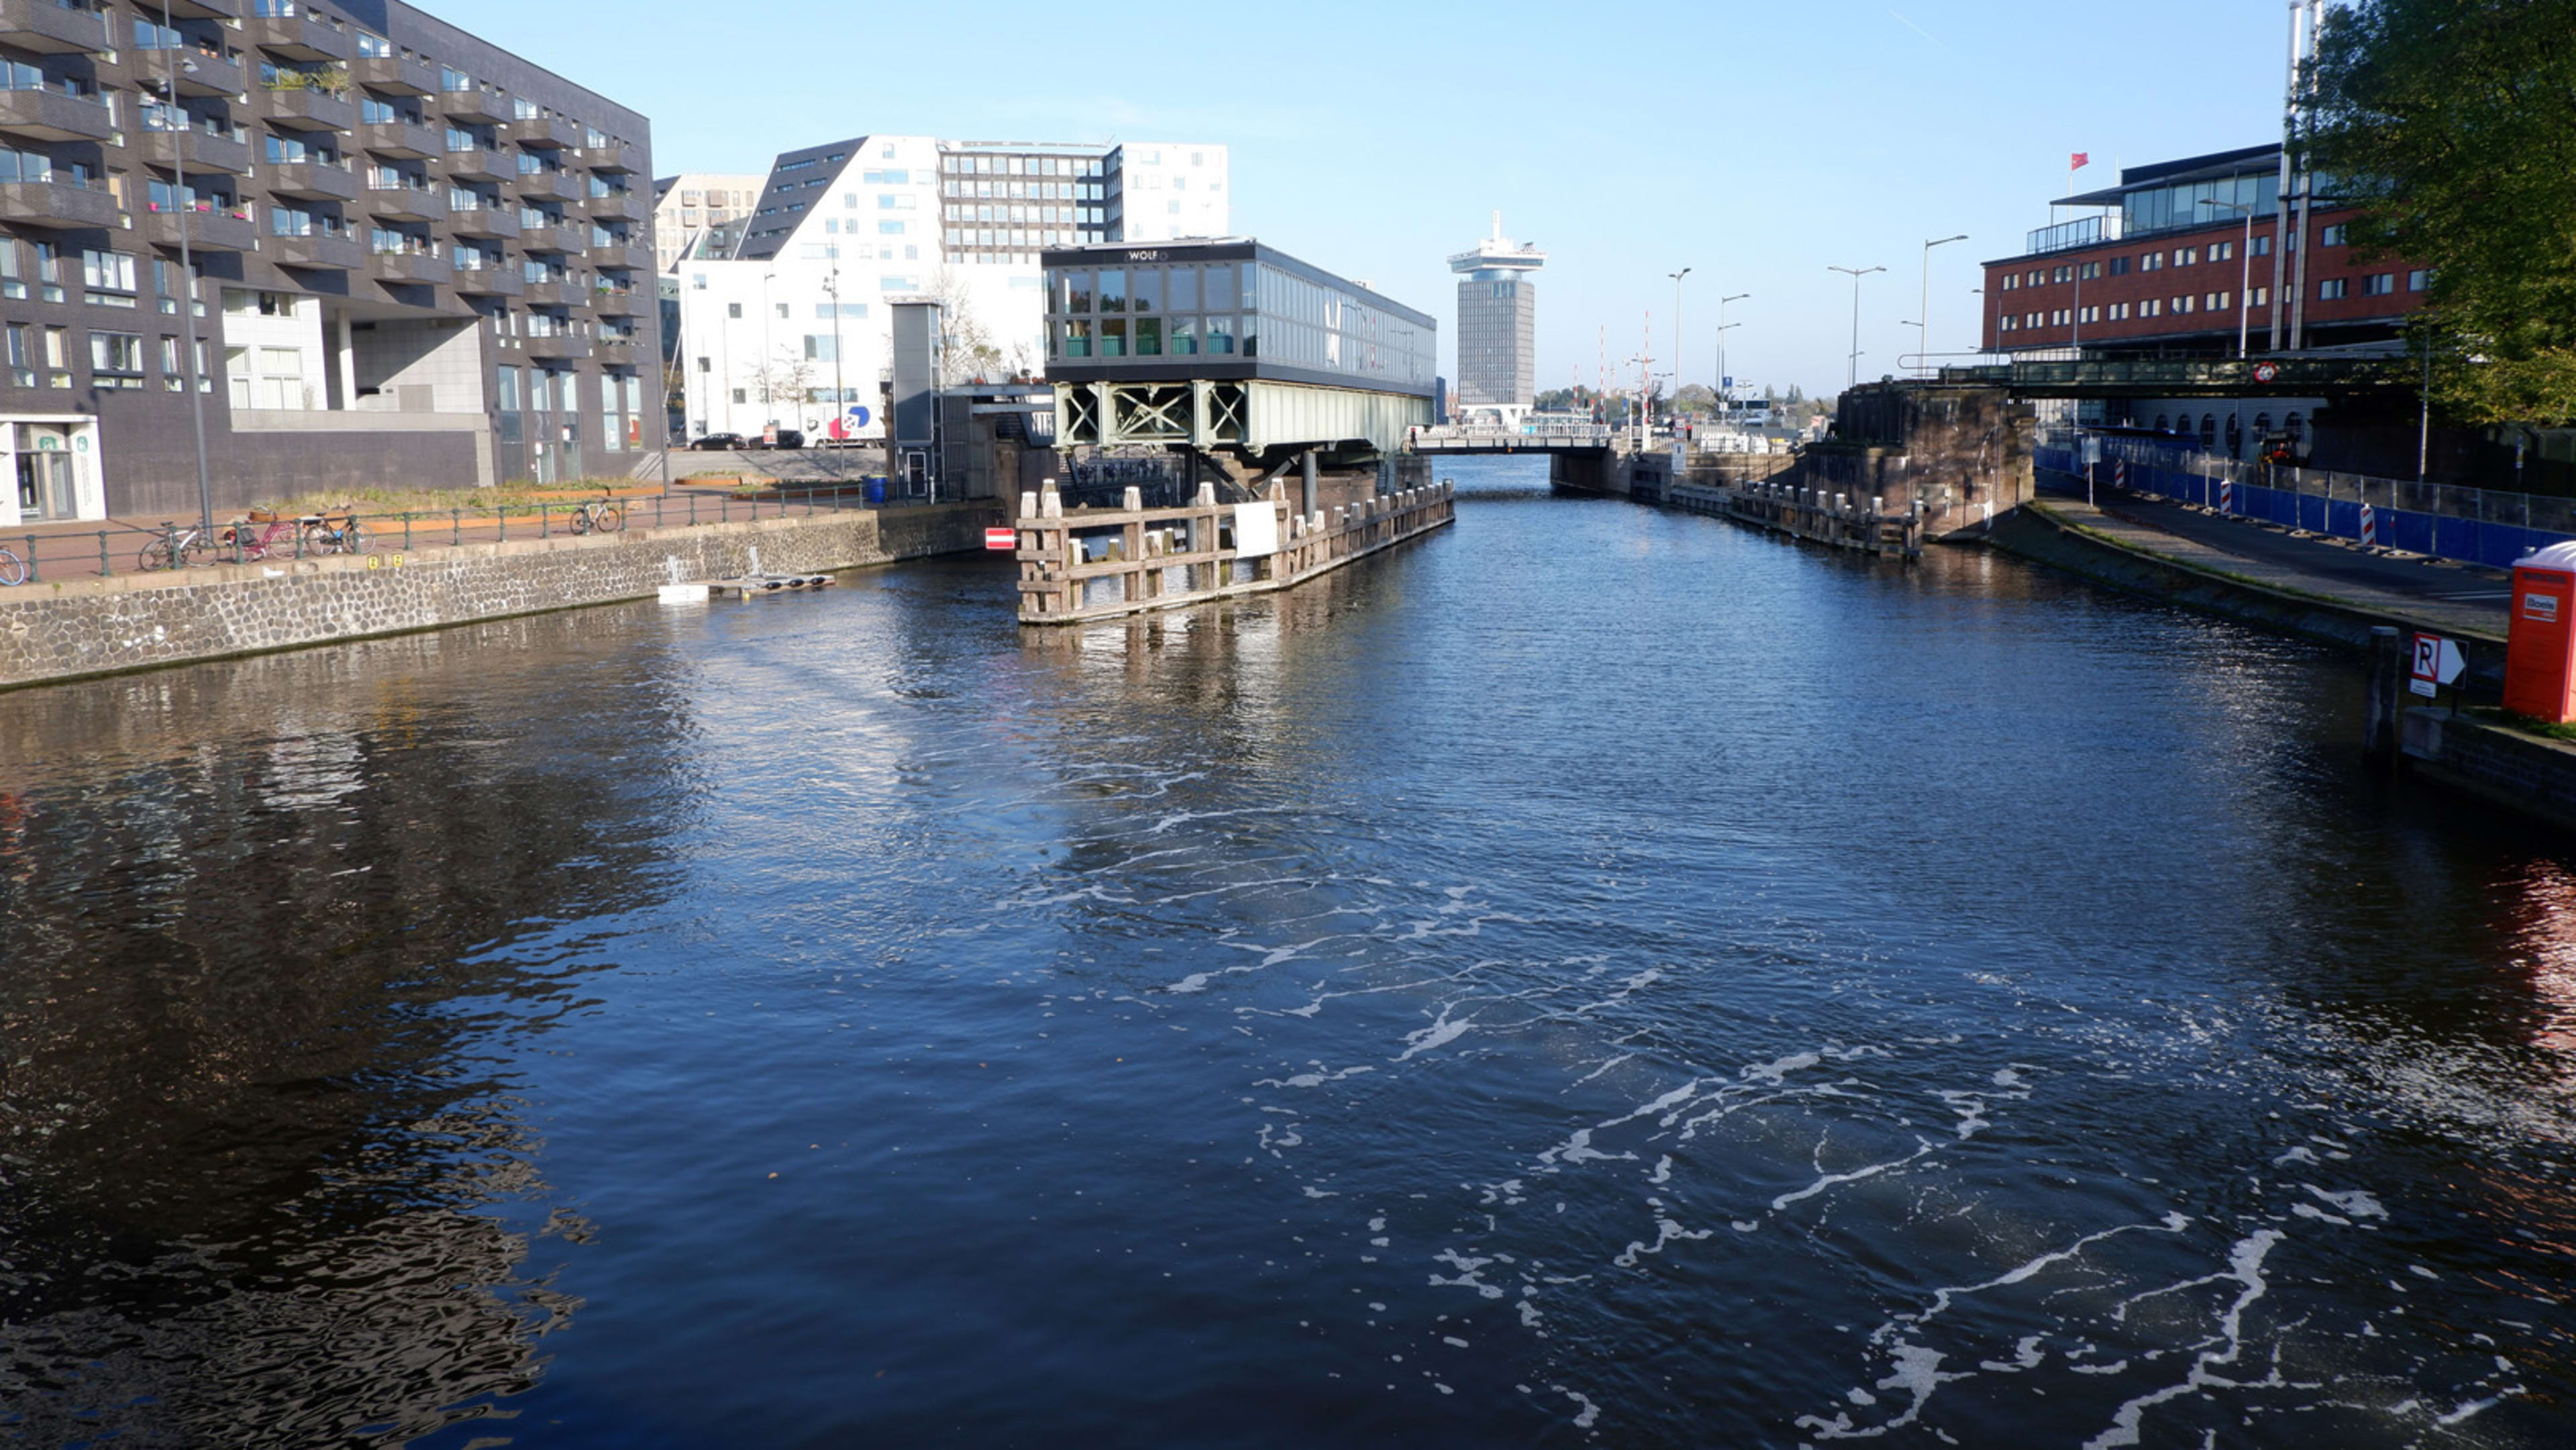 A simple burst of bubbles is keeping this canal clear of plastic